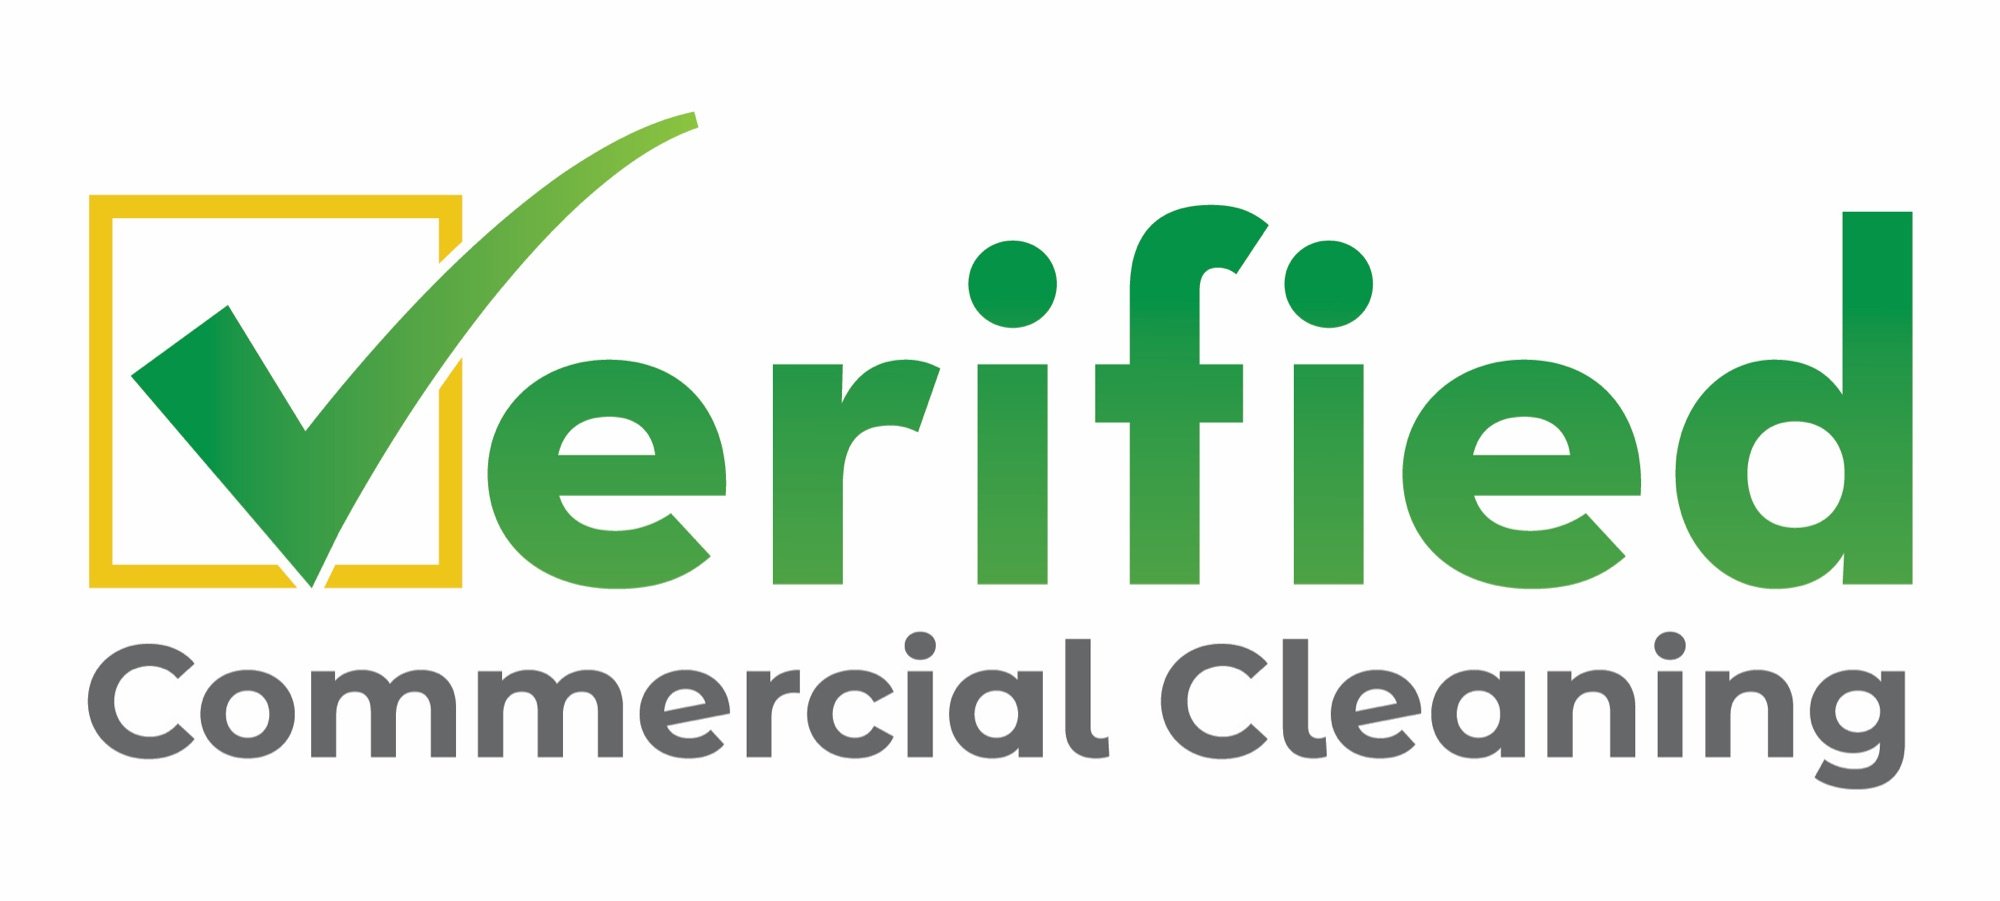 Verified Commercial Cleaning Logo